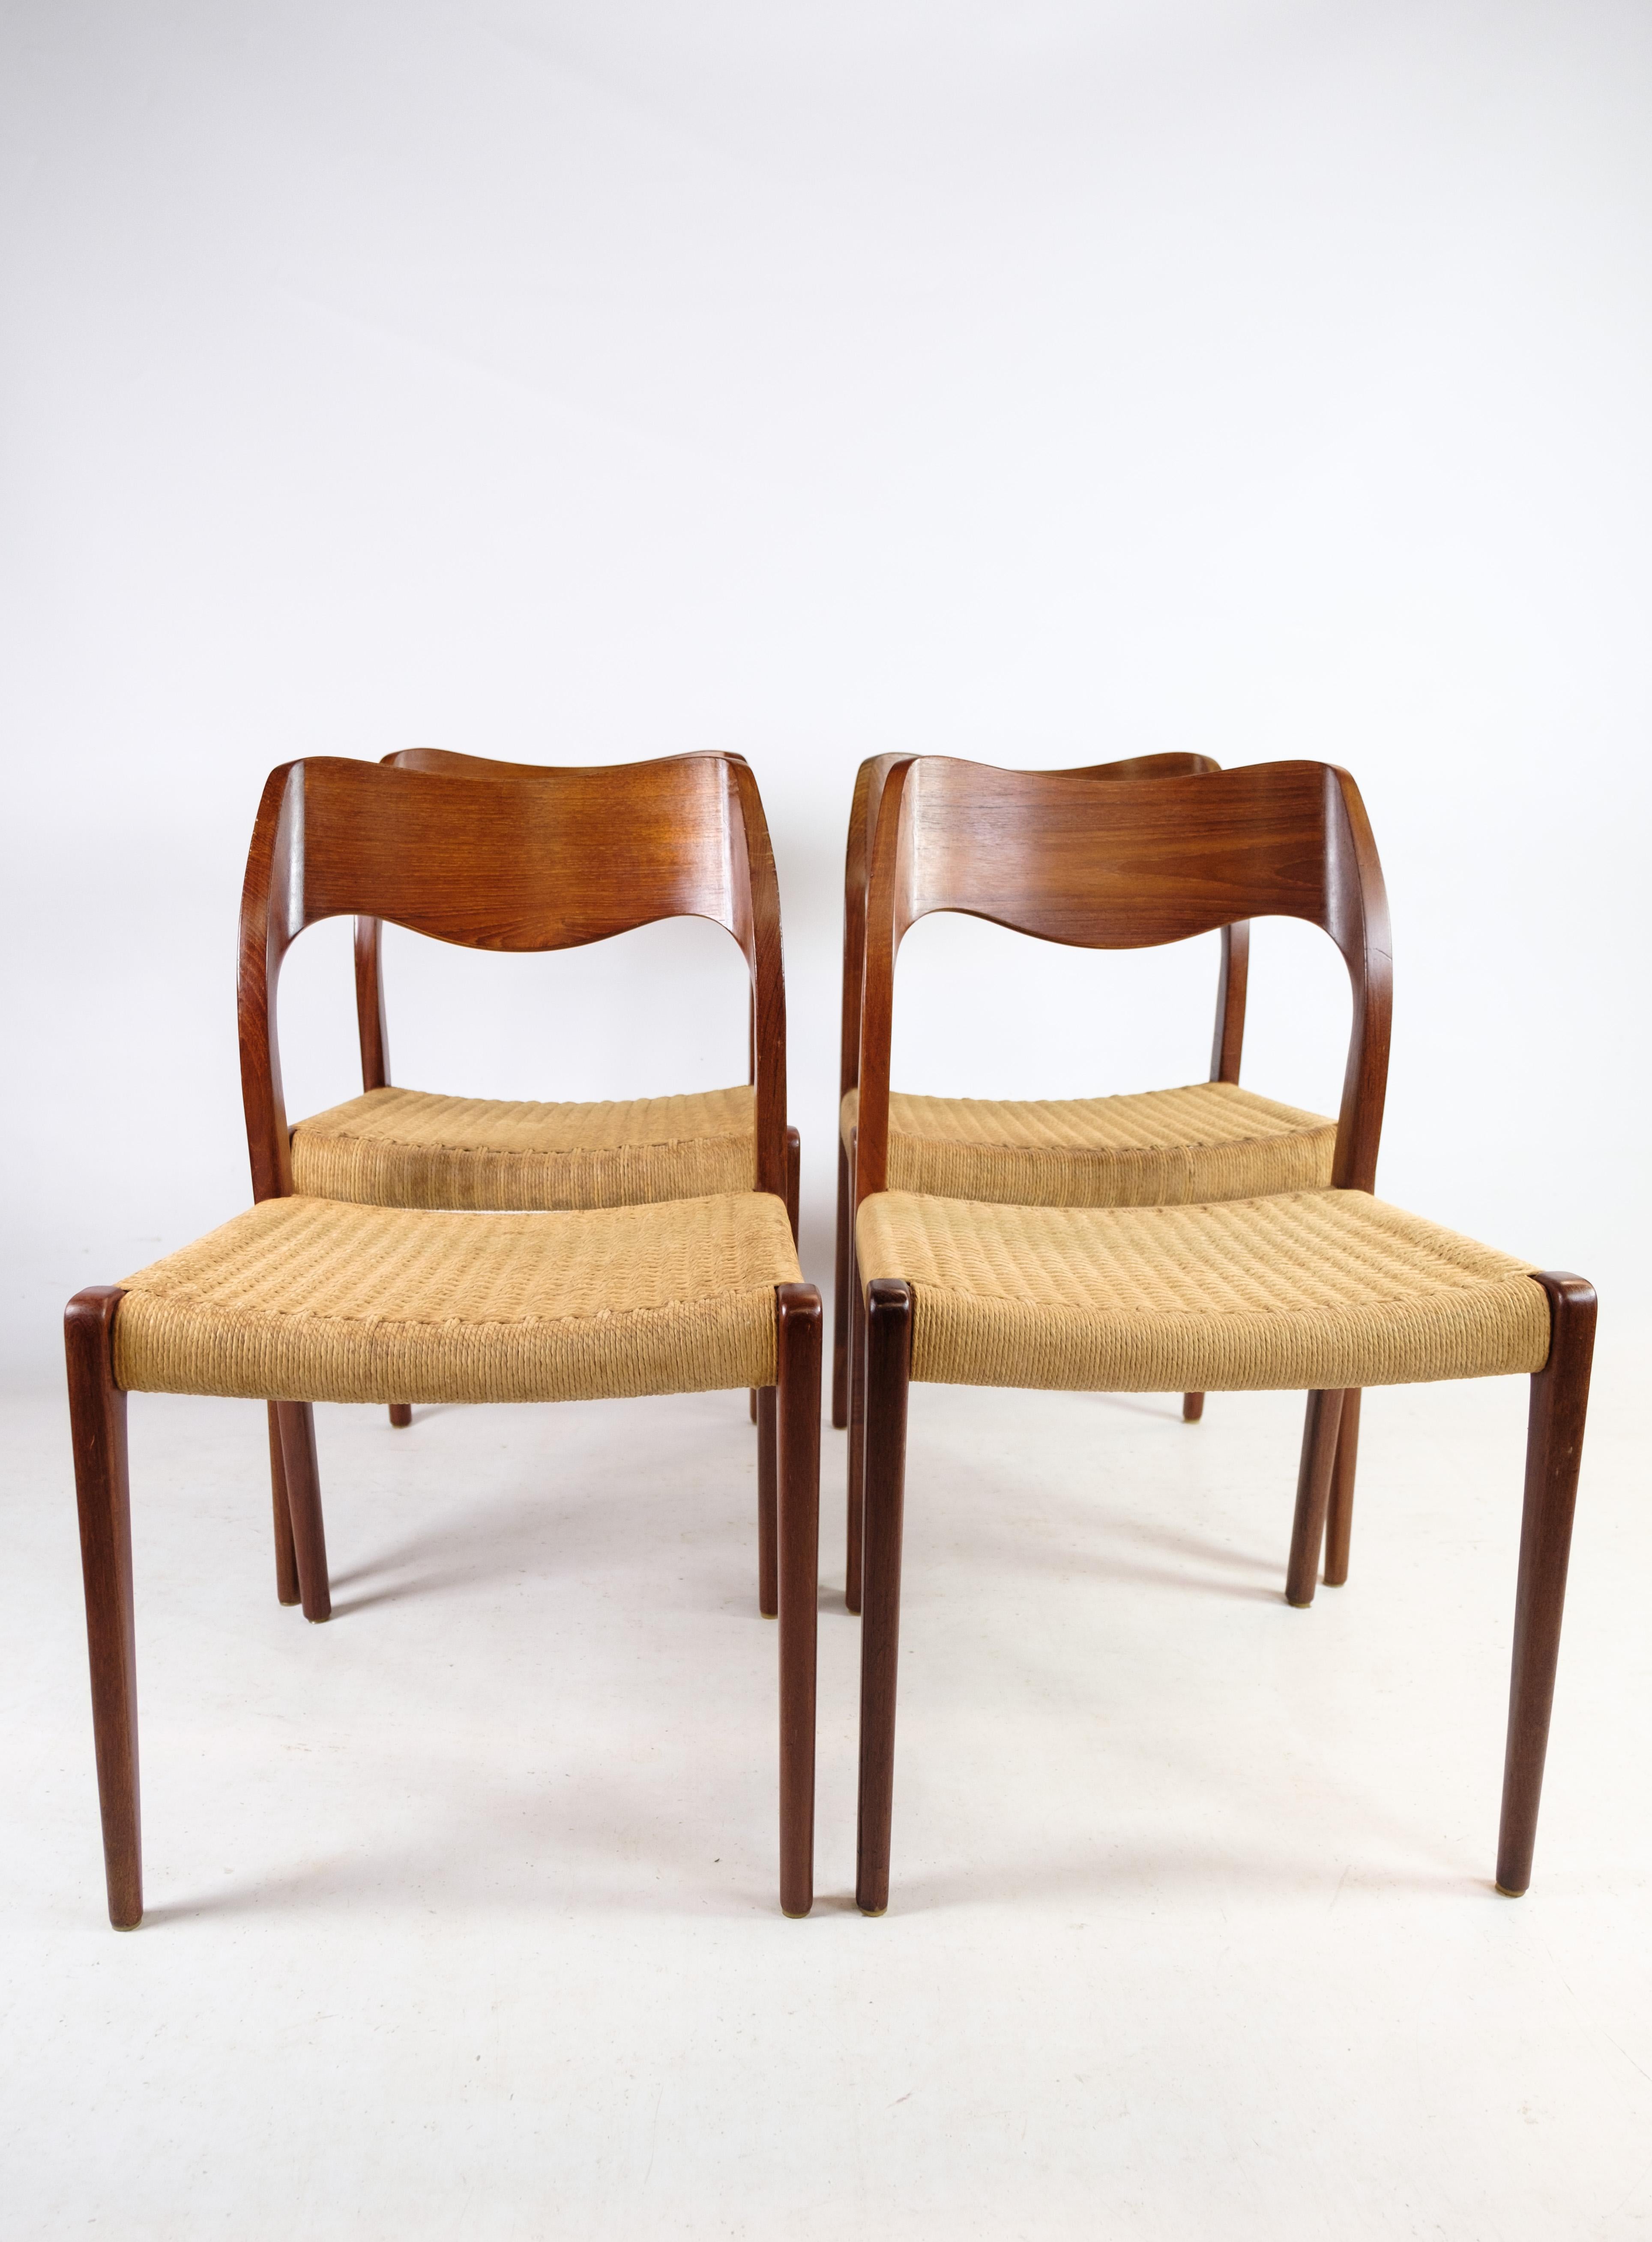 Set of 4 dining room chairs, model 71, designed by N.O Møller designed in 1951. Stands with very fine teak frame and wicker seat. Produced by J.L. Møllers Møbelfabrik.
Dimensions in cm: H: 77.5 W: 50 D: 42 SH: 45
This product will be inspected